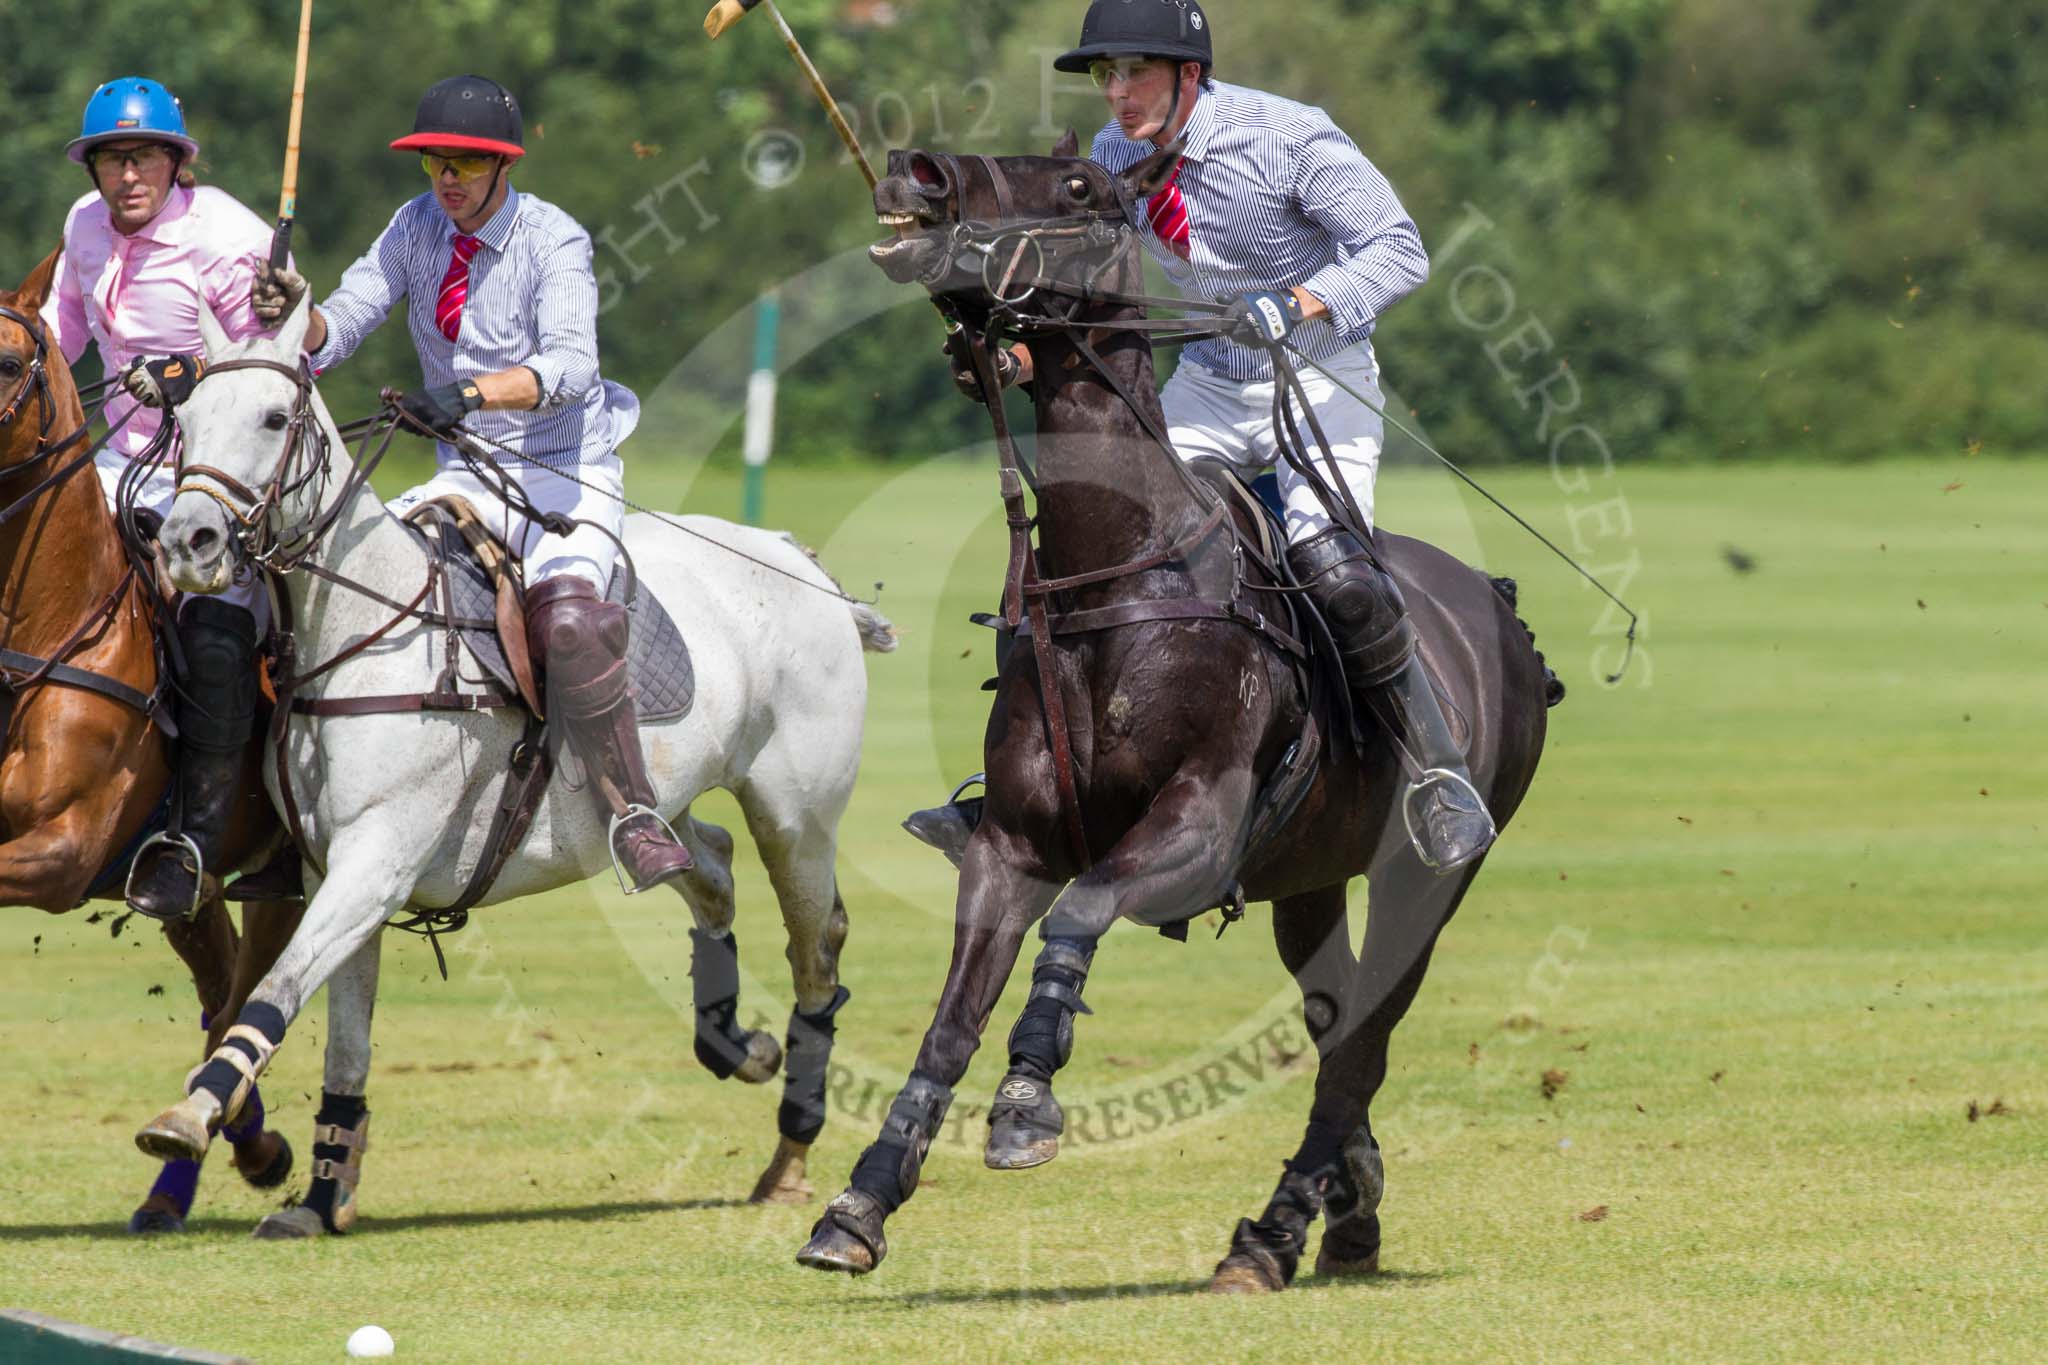 7th Heritage Polo Cup semi-finals: John Martin, Team Silver Fox USA & James Rome following..
Hurtwood Park Polo Club,
Ewhurst Green,
Surrey,
United Kingdom,
on 04 August 2012 at 11:42, image #73